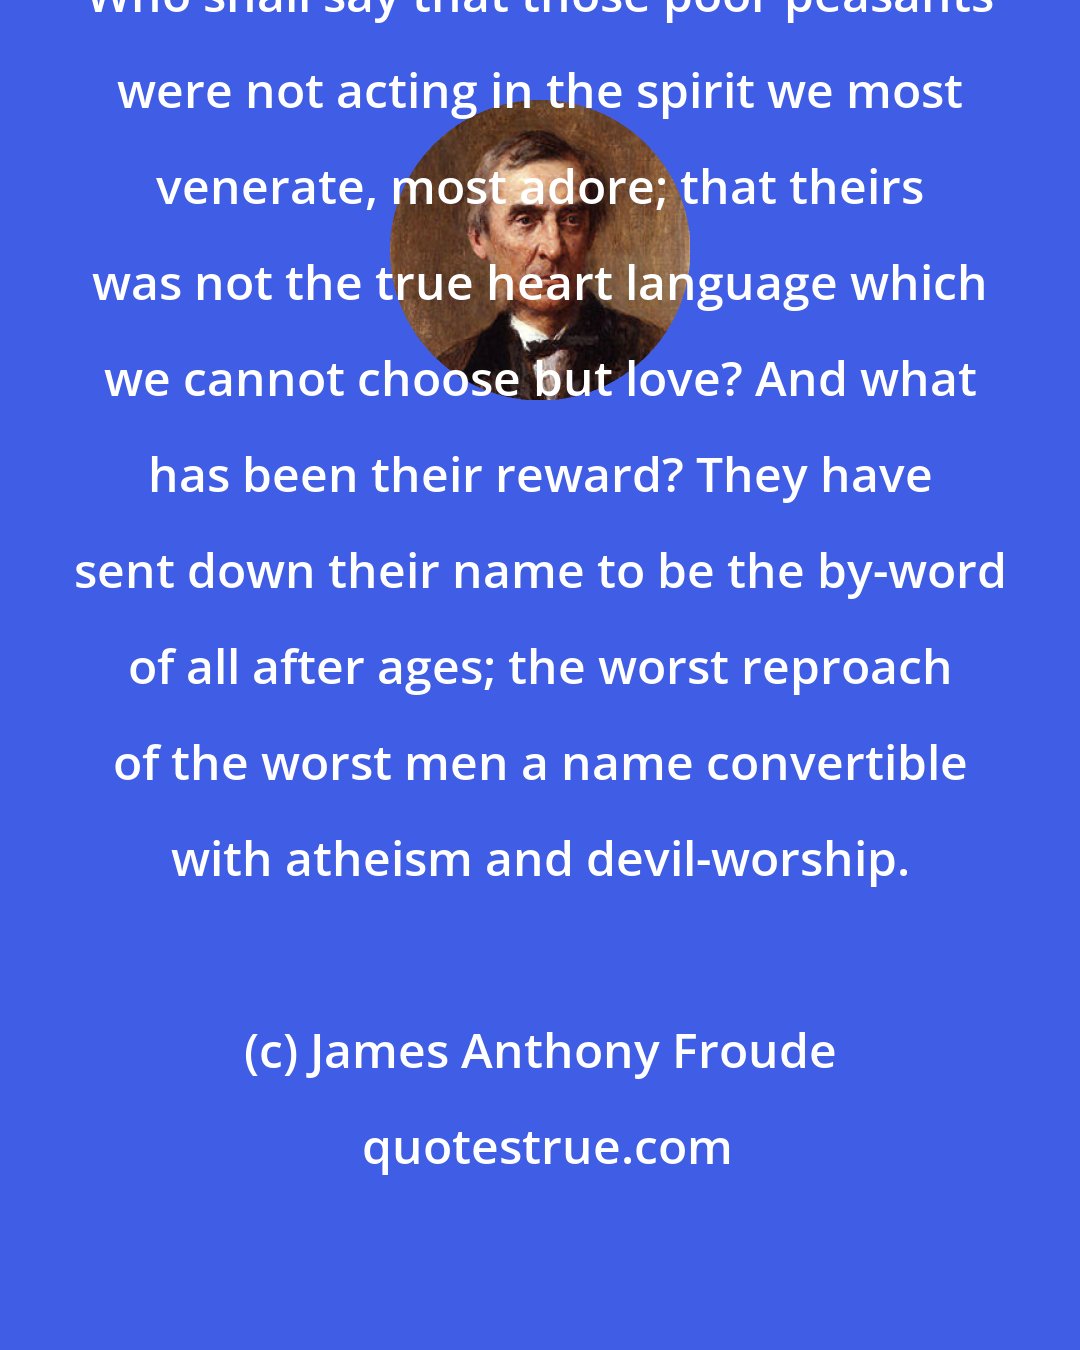 James Anthony Froude: Who shall say that those poor peasants were not acting in the spirit we most venerate, most adore; that theirs was not the true heart language which we cannot choose but love? And what has been their reward? They have sent down their name to be the by-word of all after ages; the worst reproach of the worst men a name convertible with atheism and devil-worship.